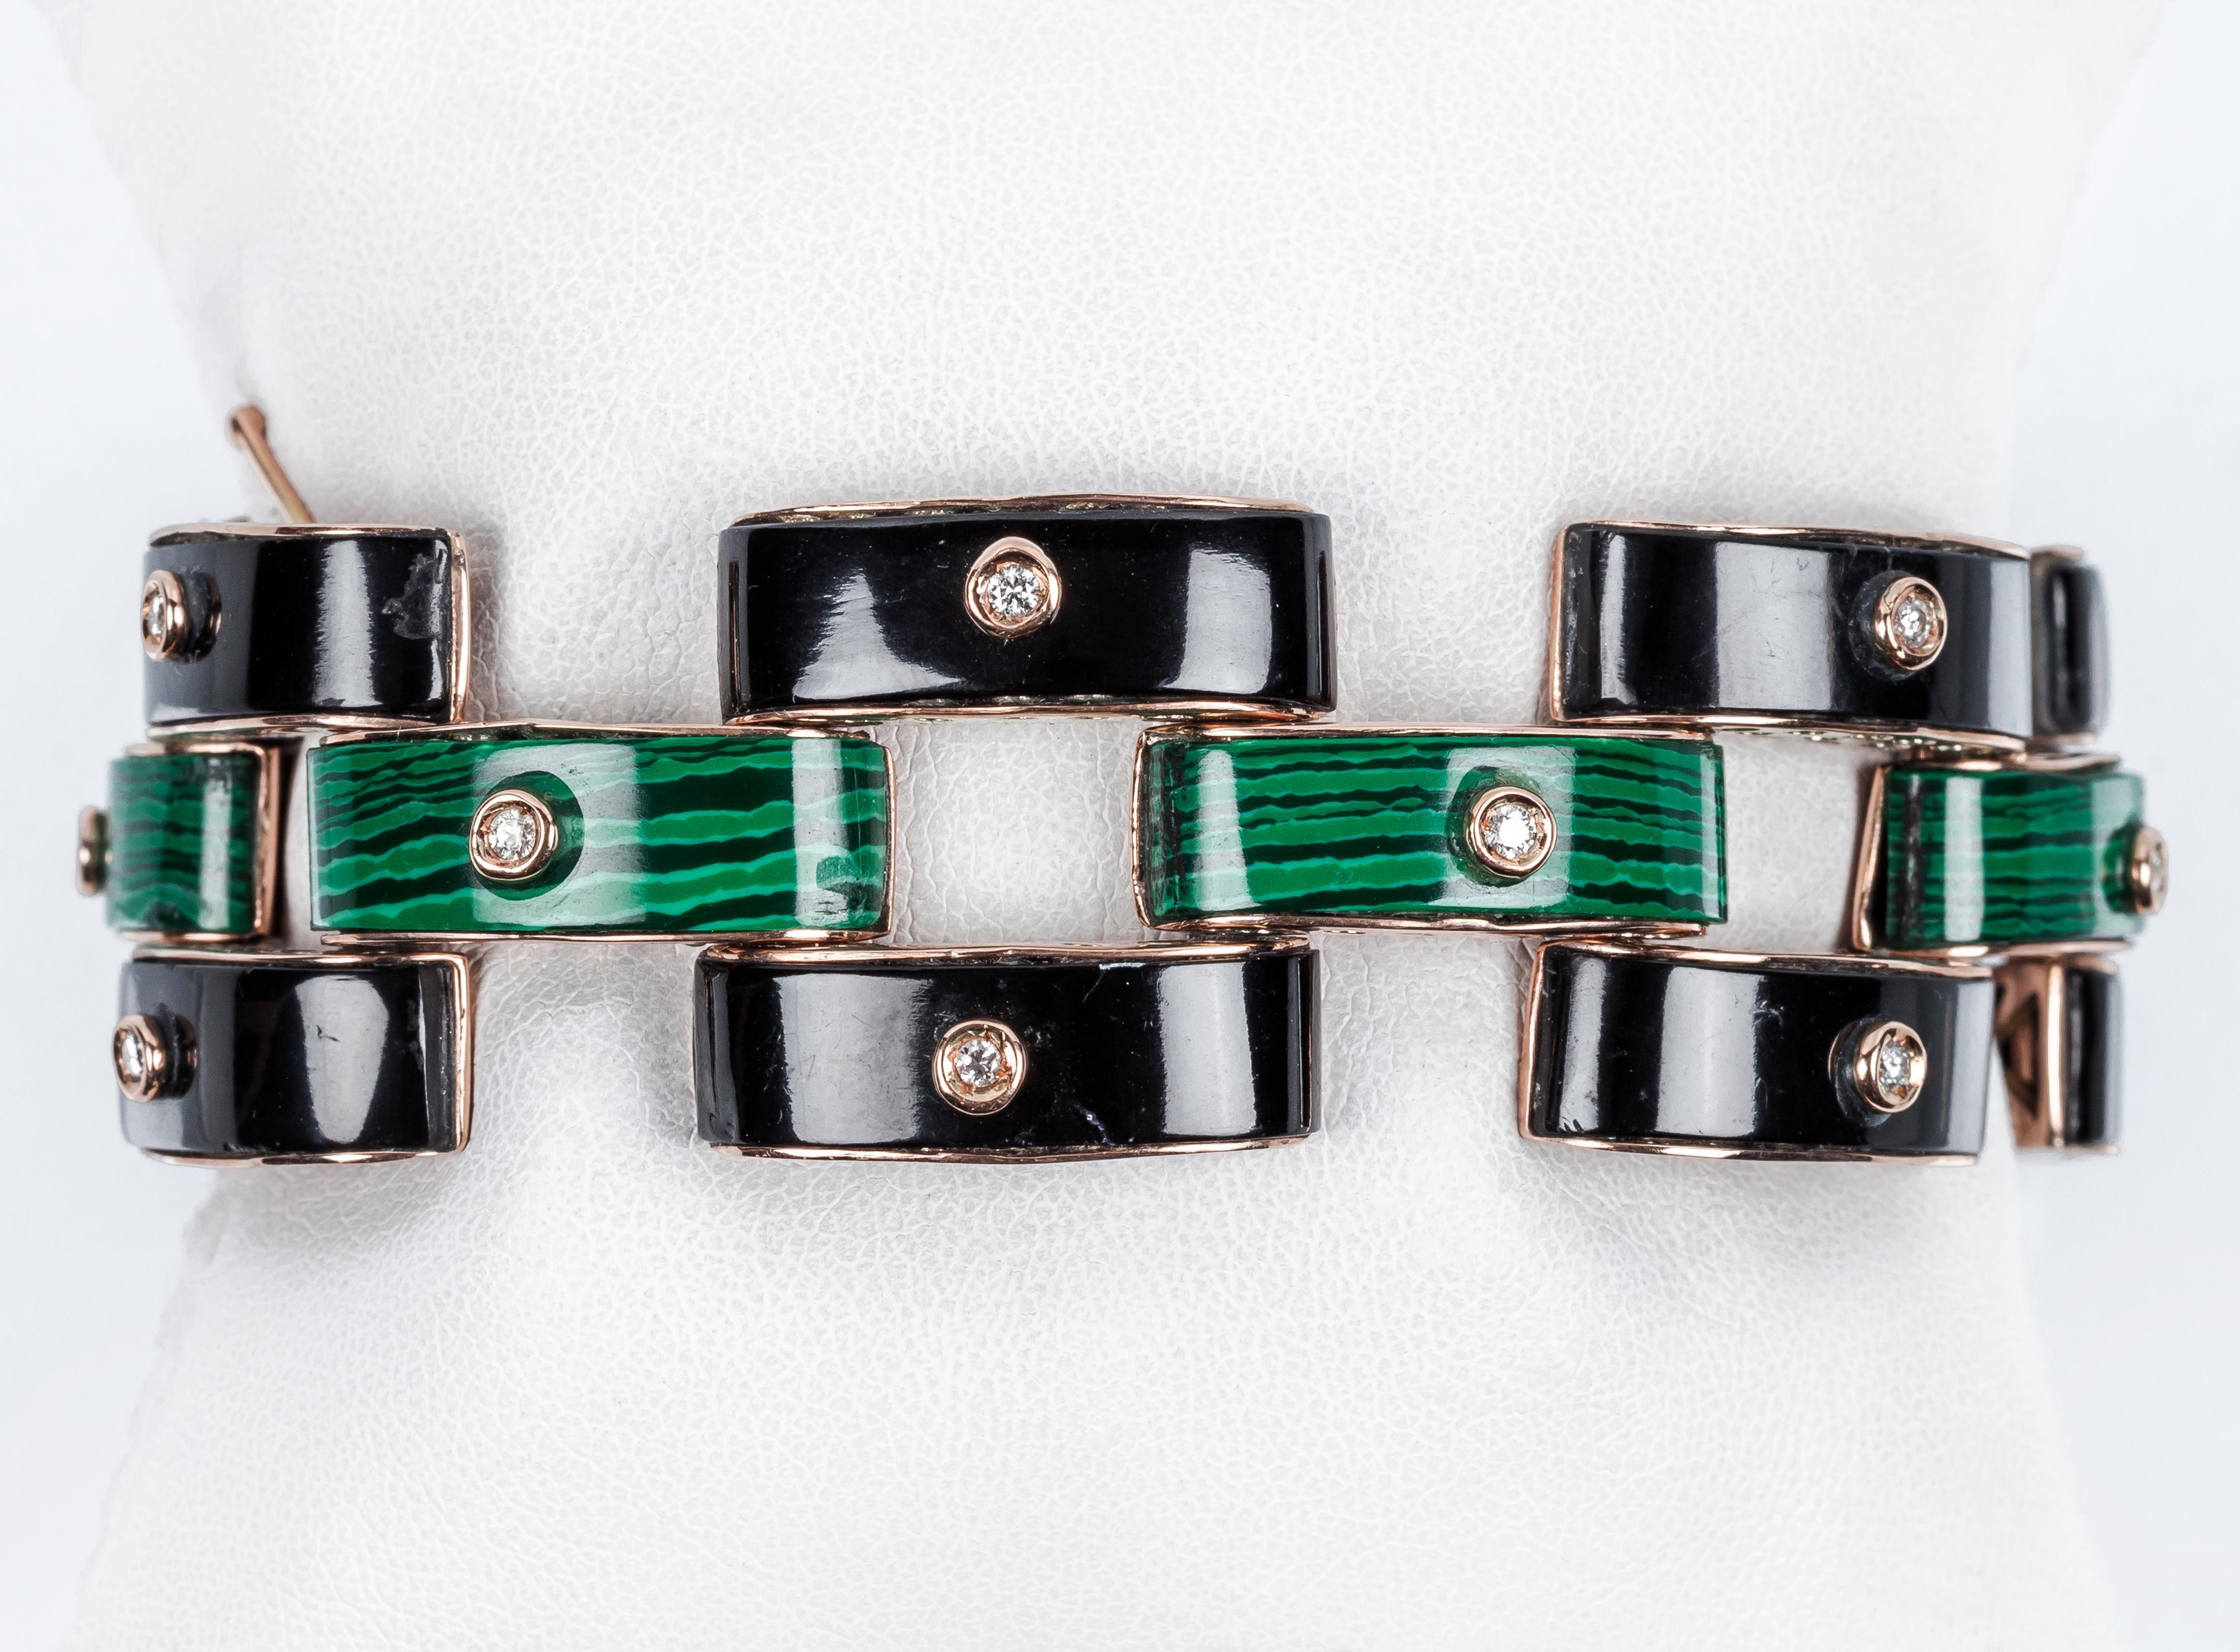 Art Deco Deco bracelet, made up of articulated links, tank tecnique in black onyx and malachite with a clean, white brilliant cut diamond.
Solid 9K rose gold setting 
Diamonds 18 bts: 0.72 ct approx. H color, VS purity
Security chain.